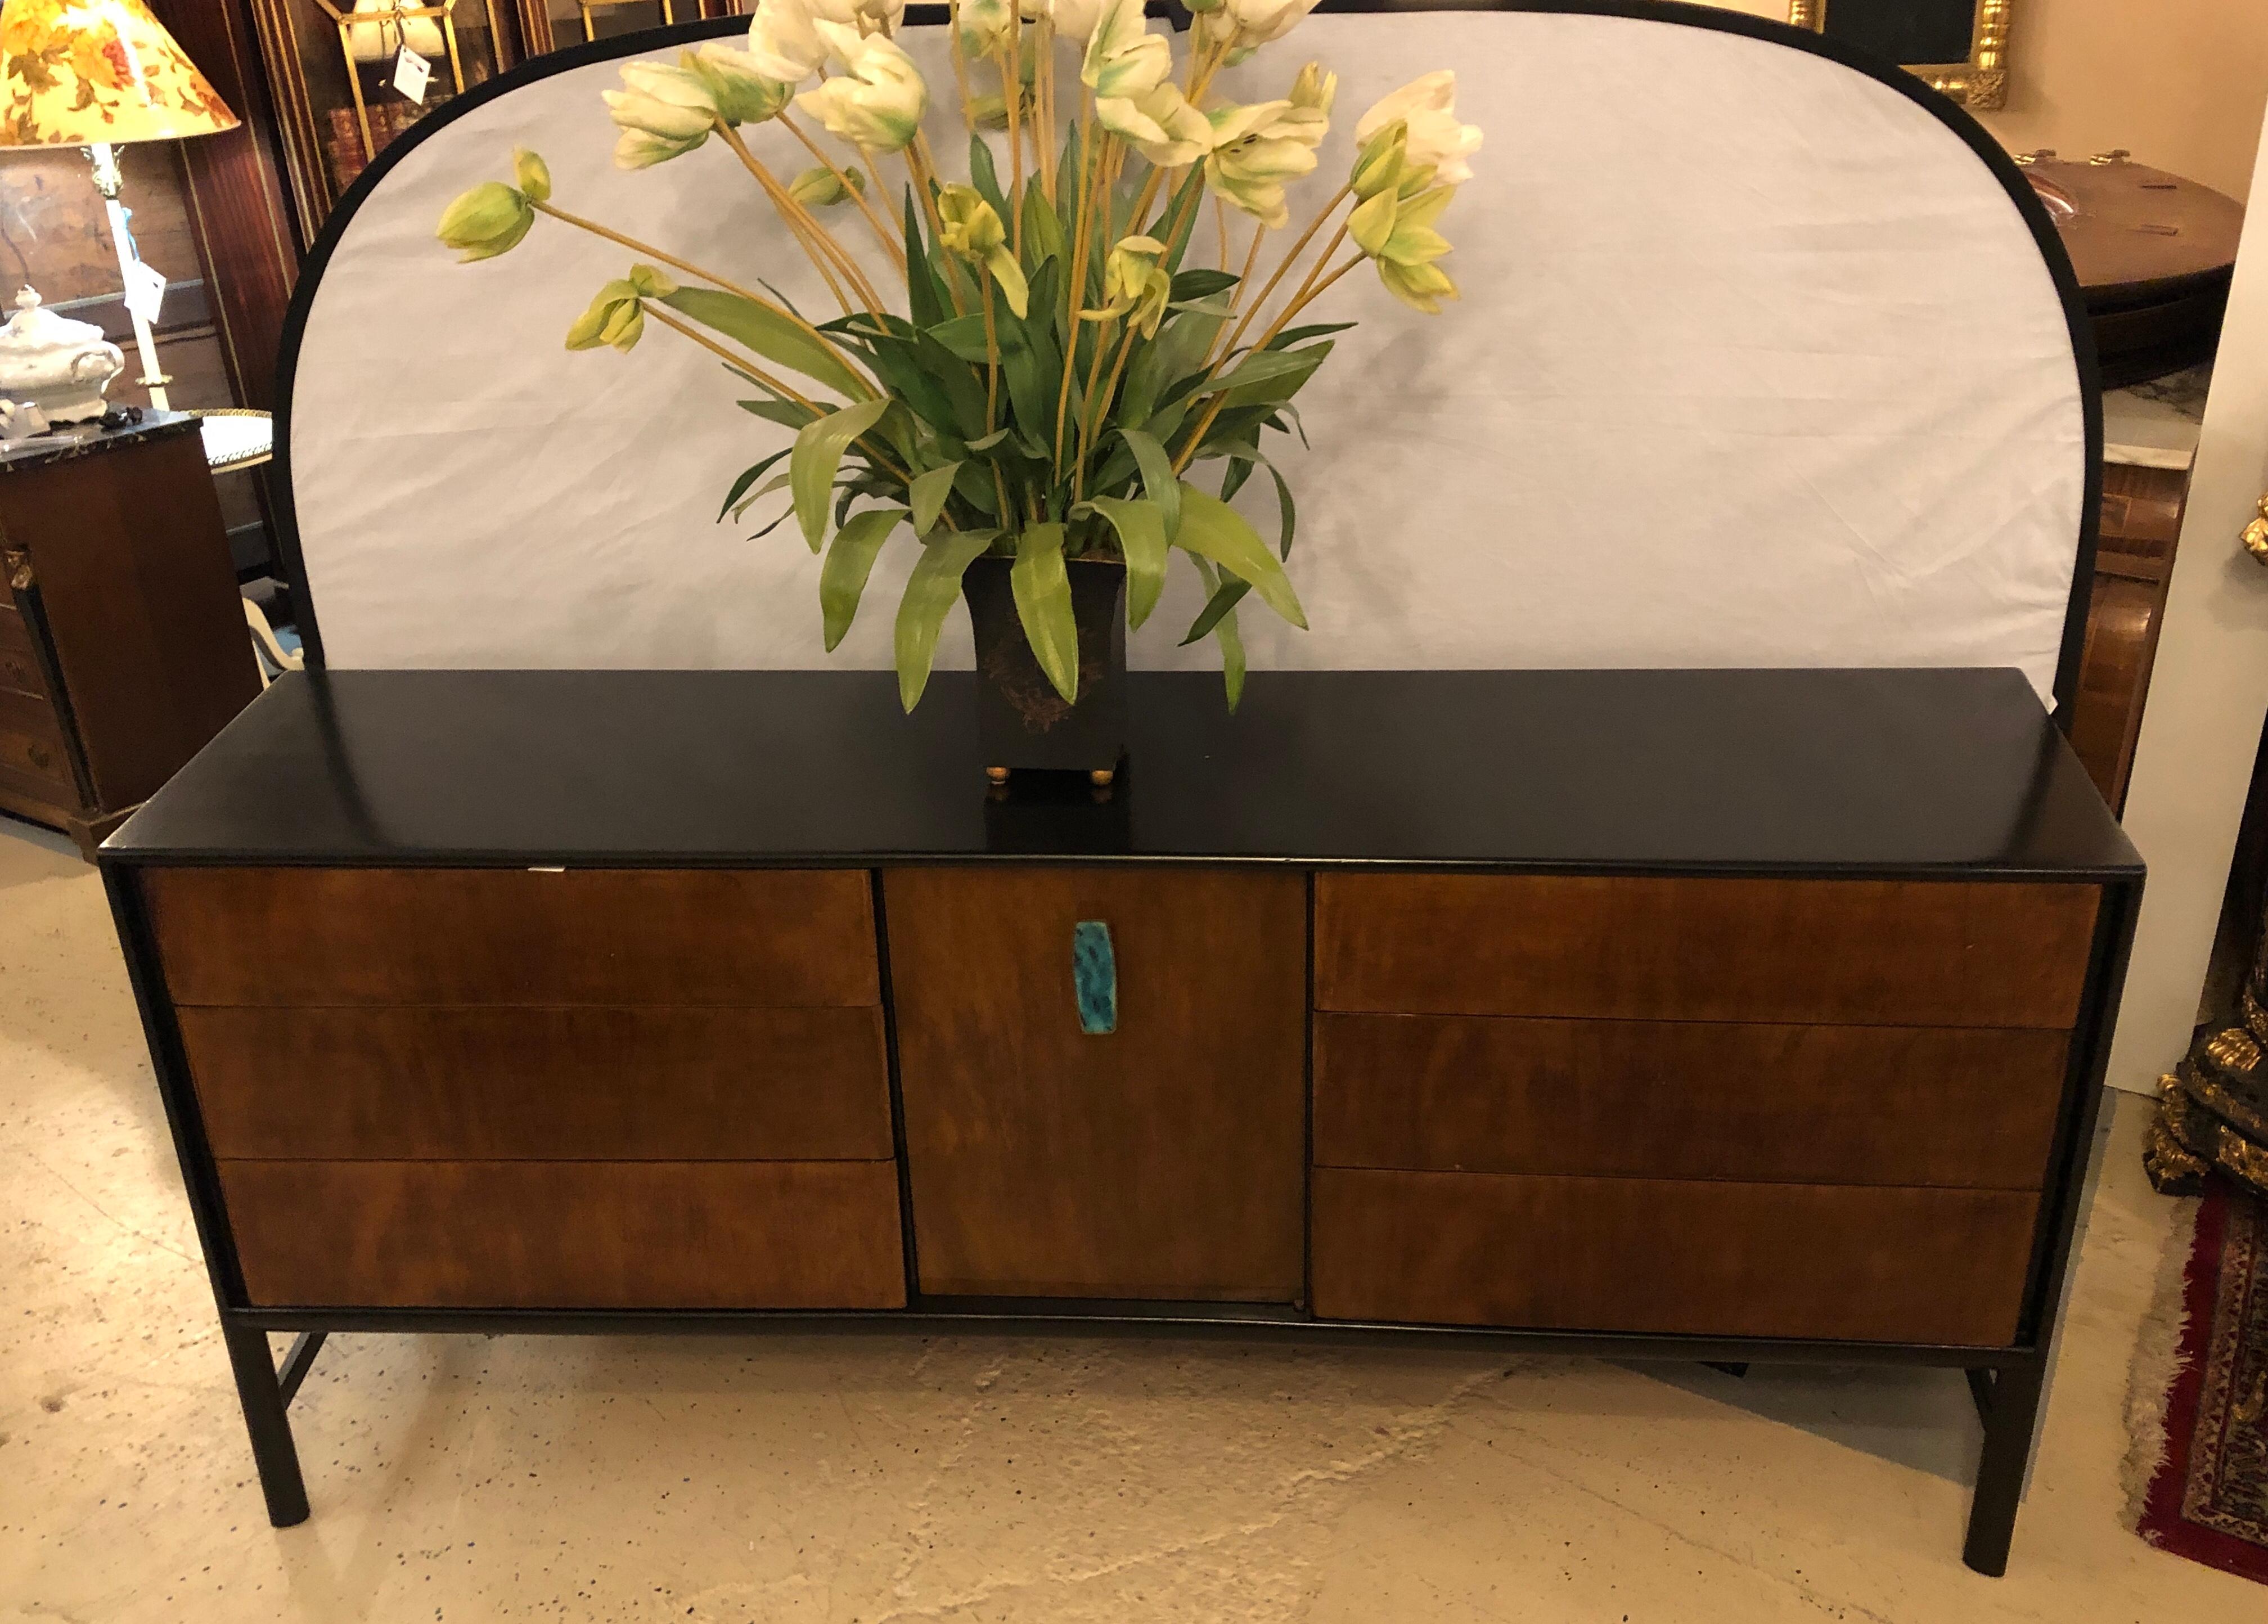 A Simply stunning John Stuart ebony and burl wood Mid-Century Modern dresser or commode, designed by Ray Sabota. This one of a kind ebony cased piece has finely polished drawer fronts the center door w its Malachite form drawer pull leading to a